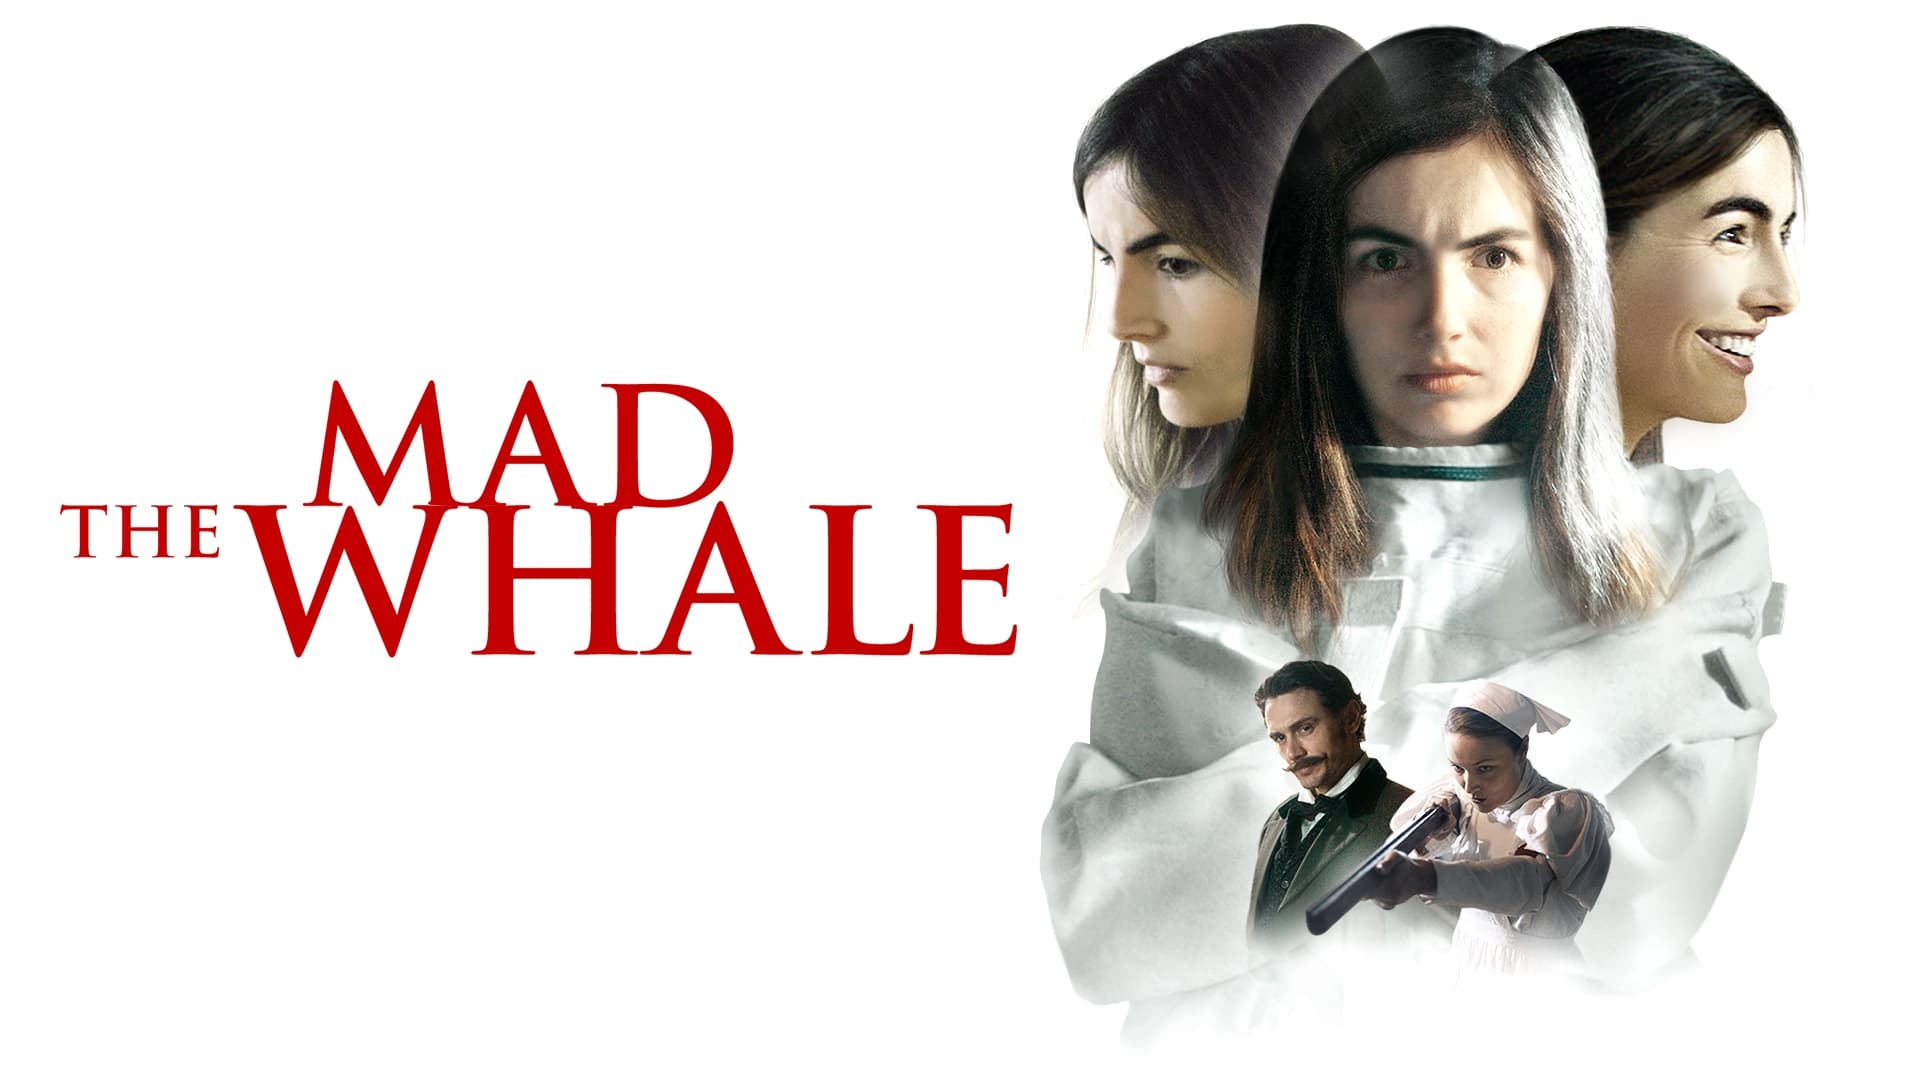 The Mad Whale